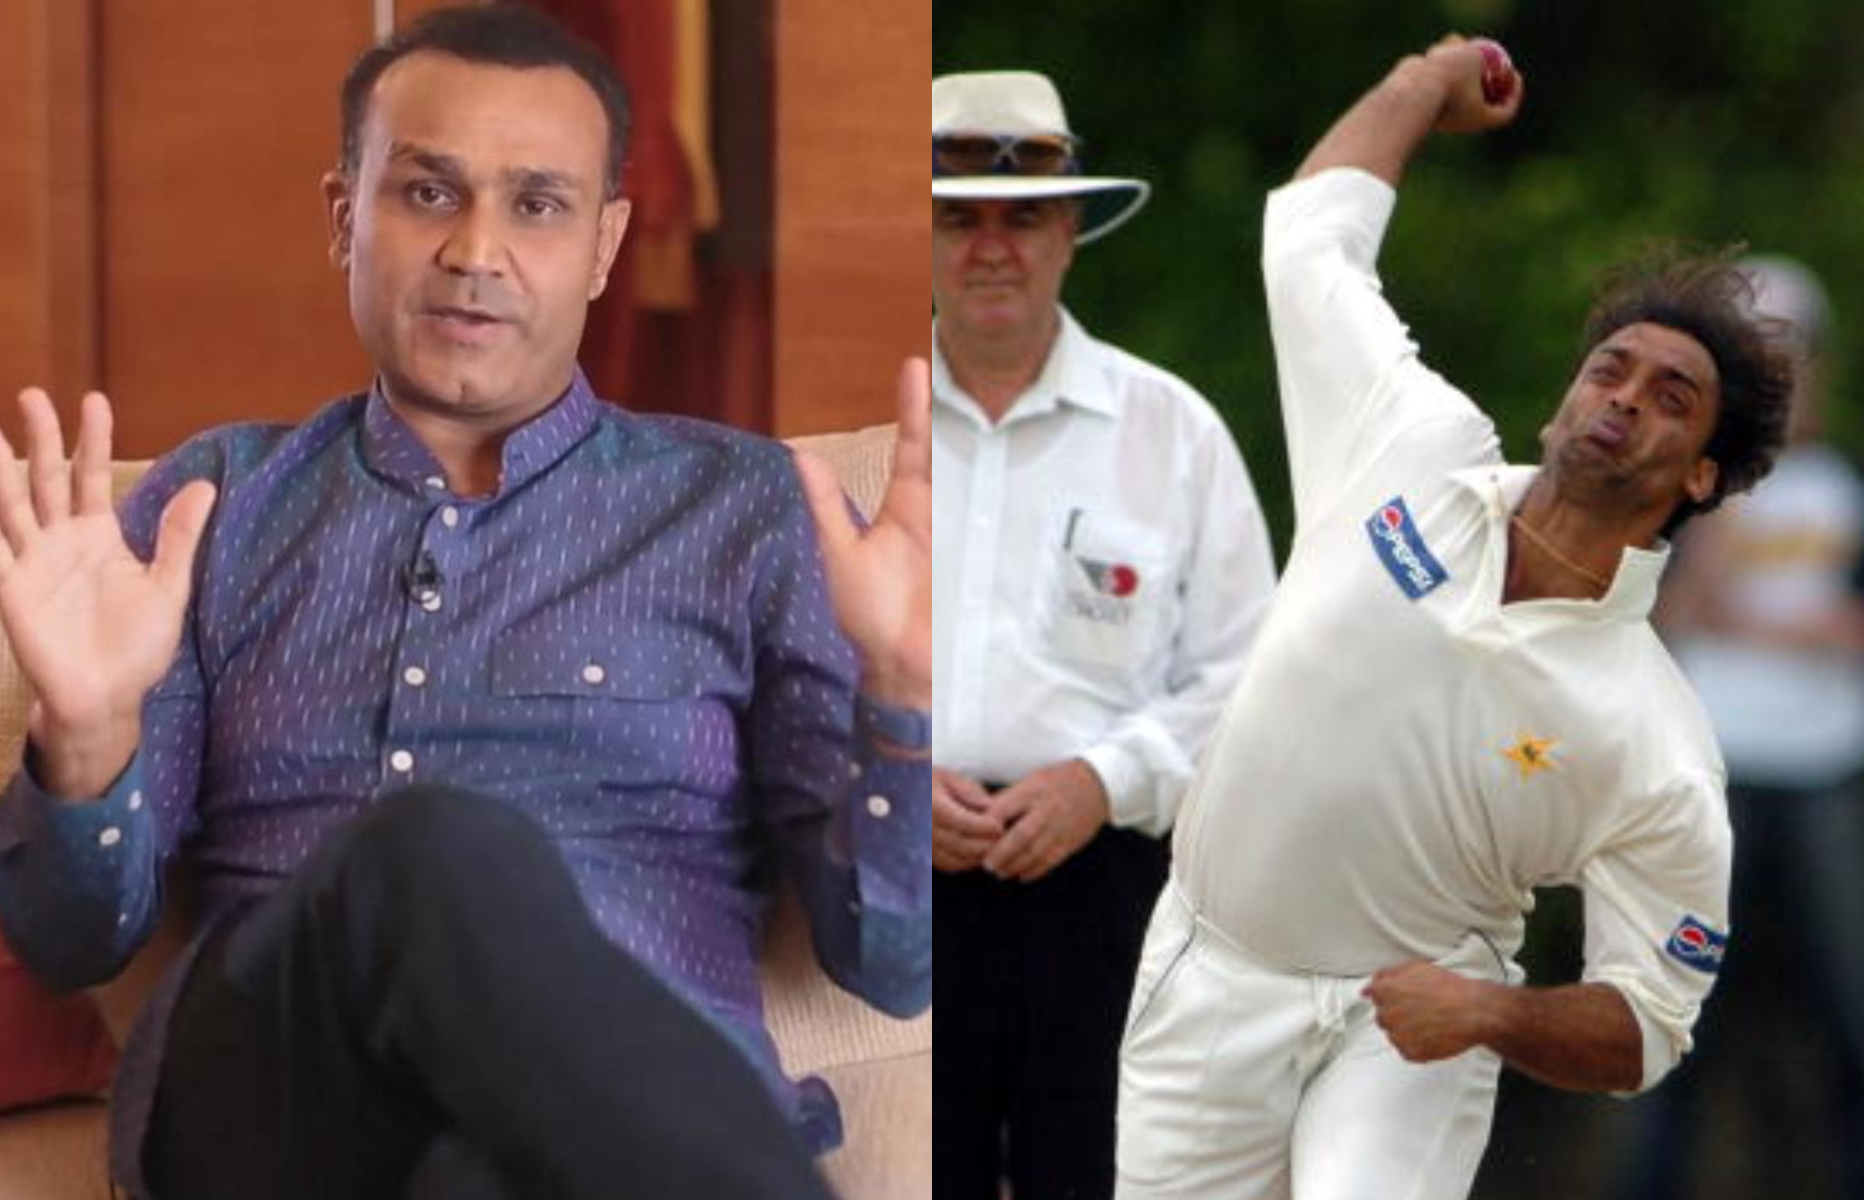 Sehwag commented on Shoaib Akhtar's controversial bowling action | Getty